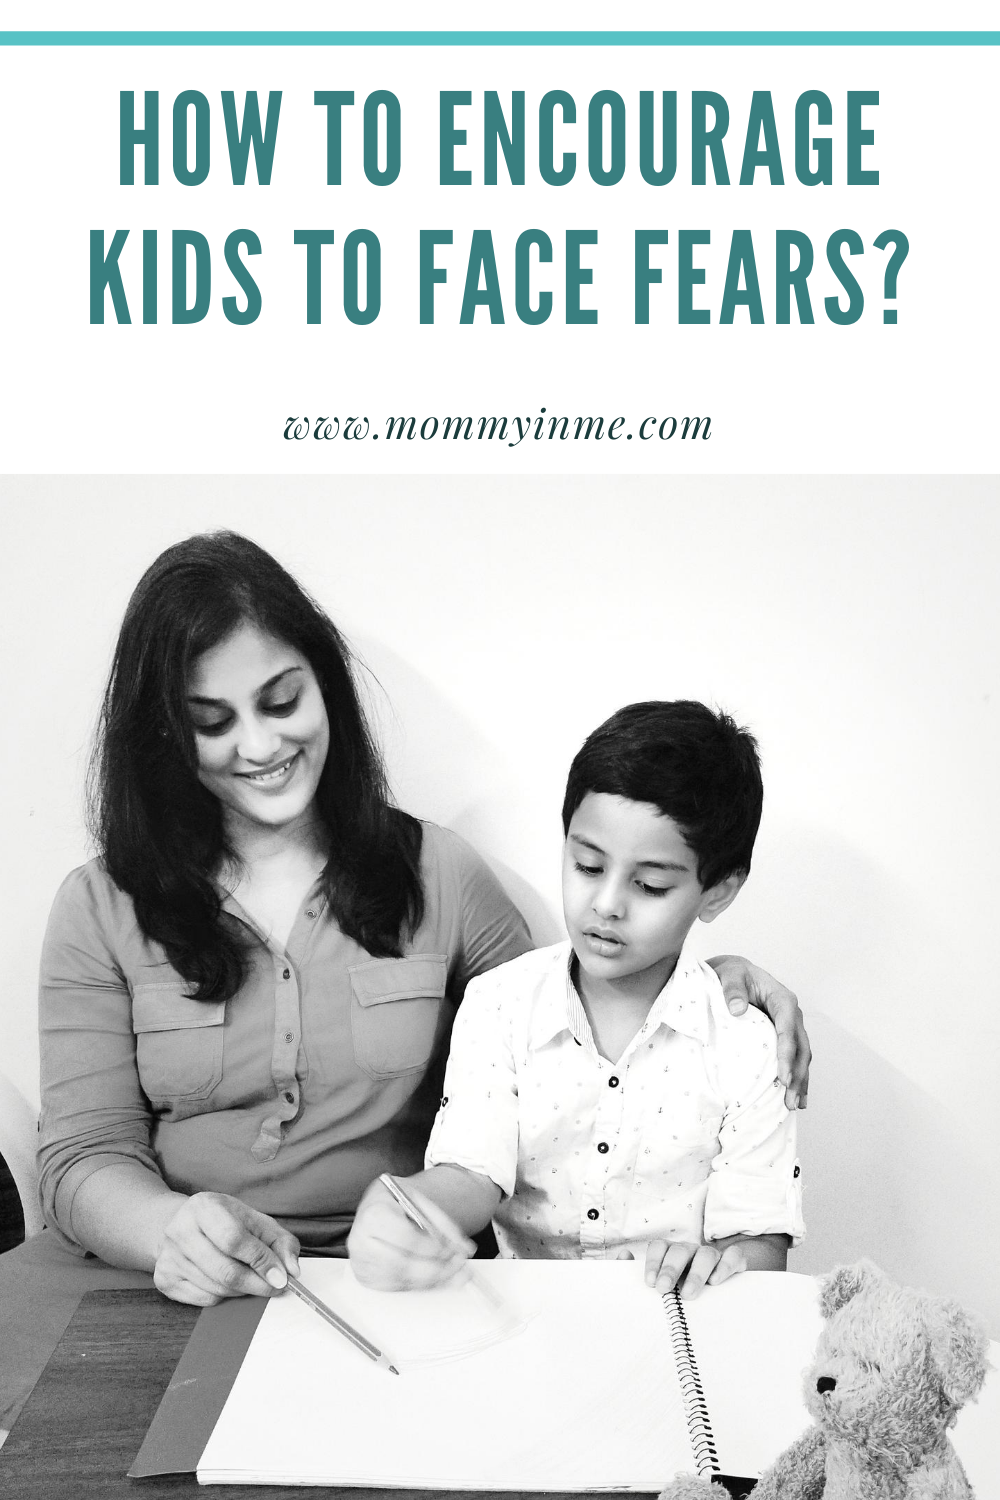 The fear of darkness, fear of bugs, fear of water, all these are some real fears for young children. As parents, we’re always there to soothe kids and accommodate their “fears”. So how to How to encourage kids to face fears? #parentinghacks #parentingtips #momblogger #pediasure #staysurewithPediasure #facefears 